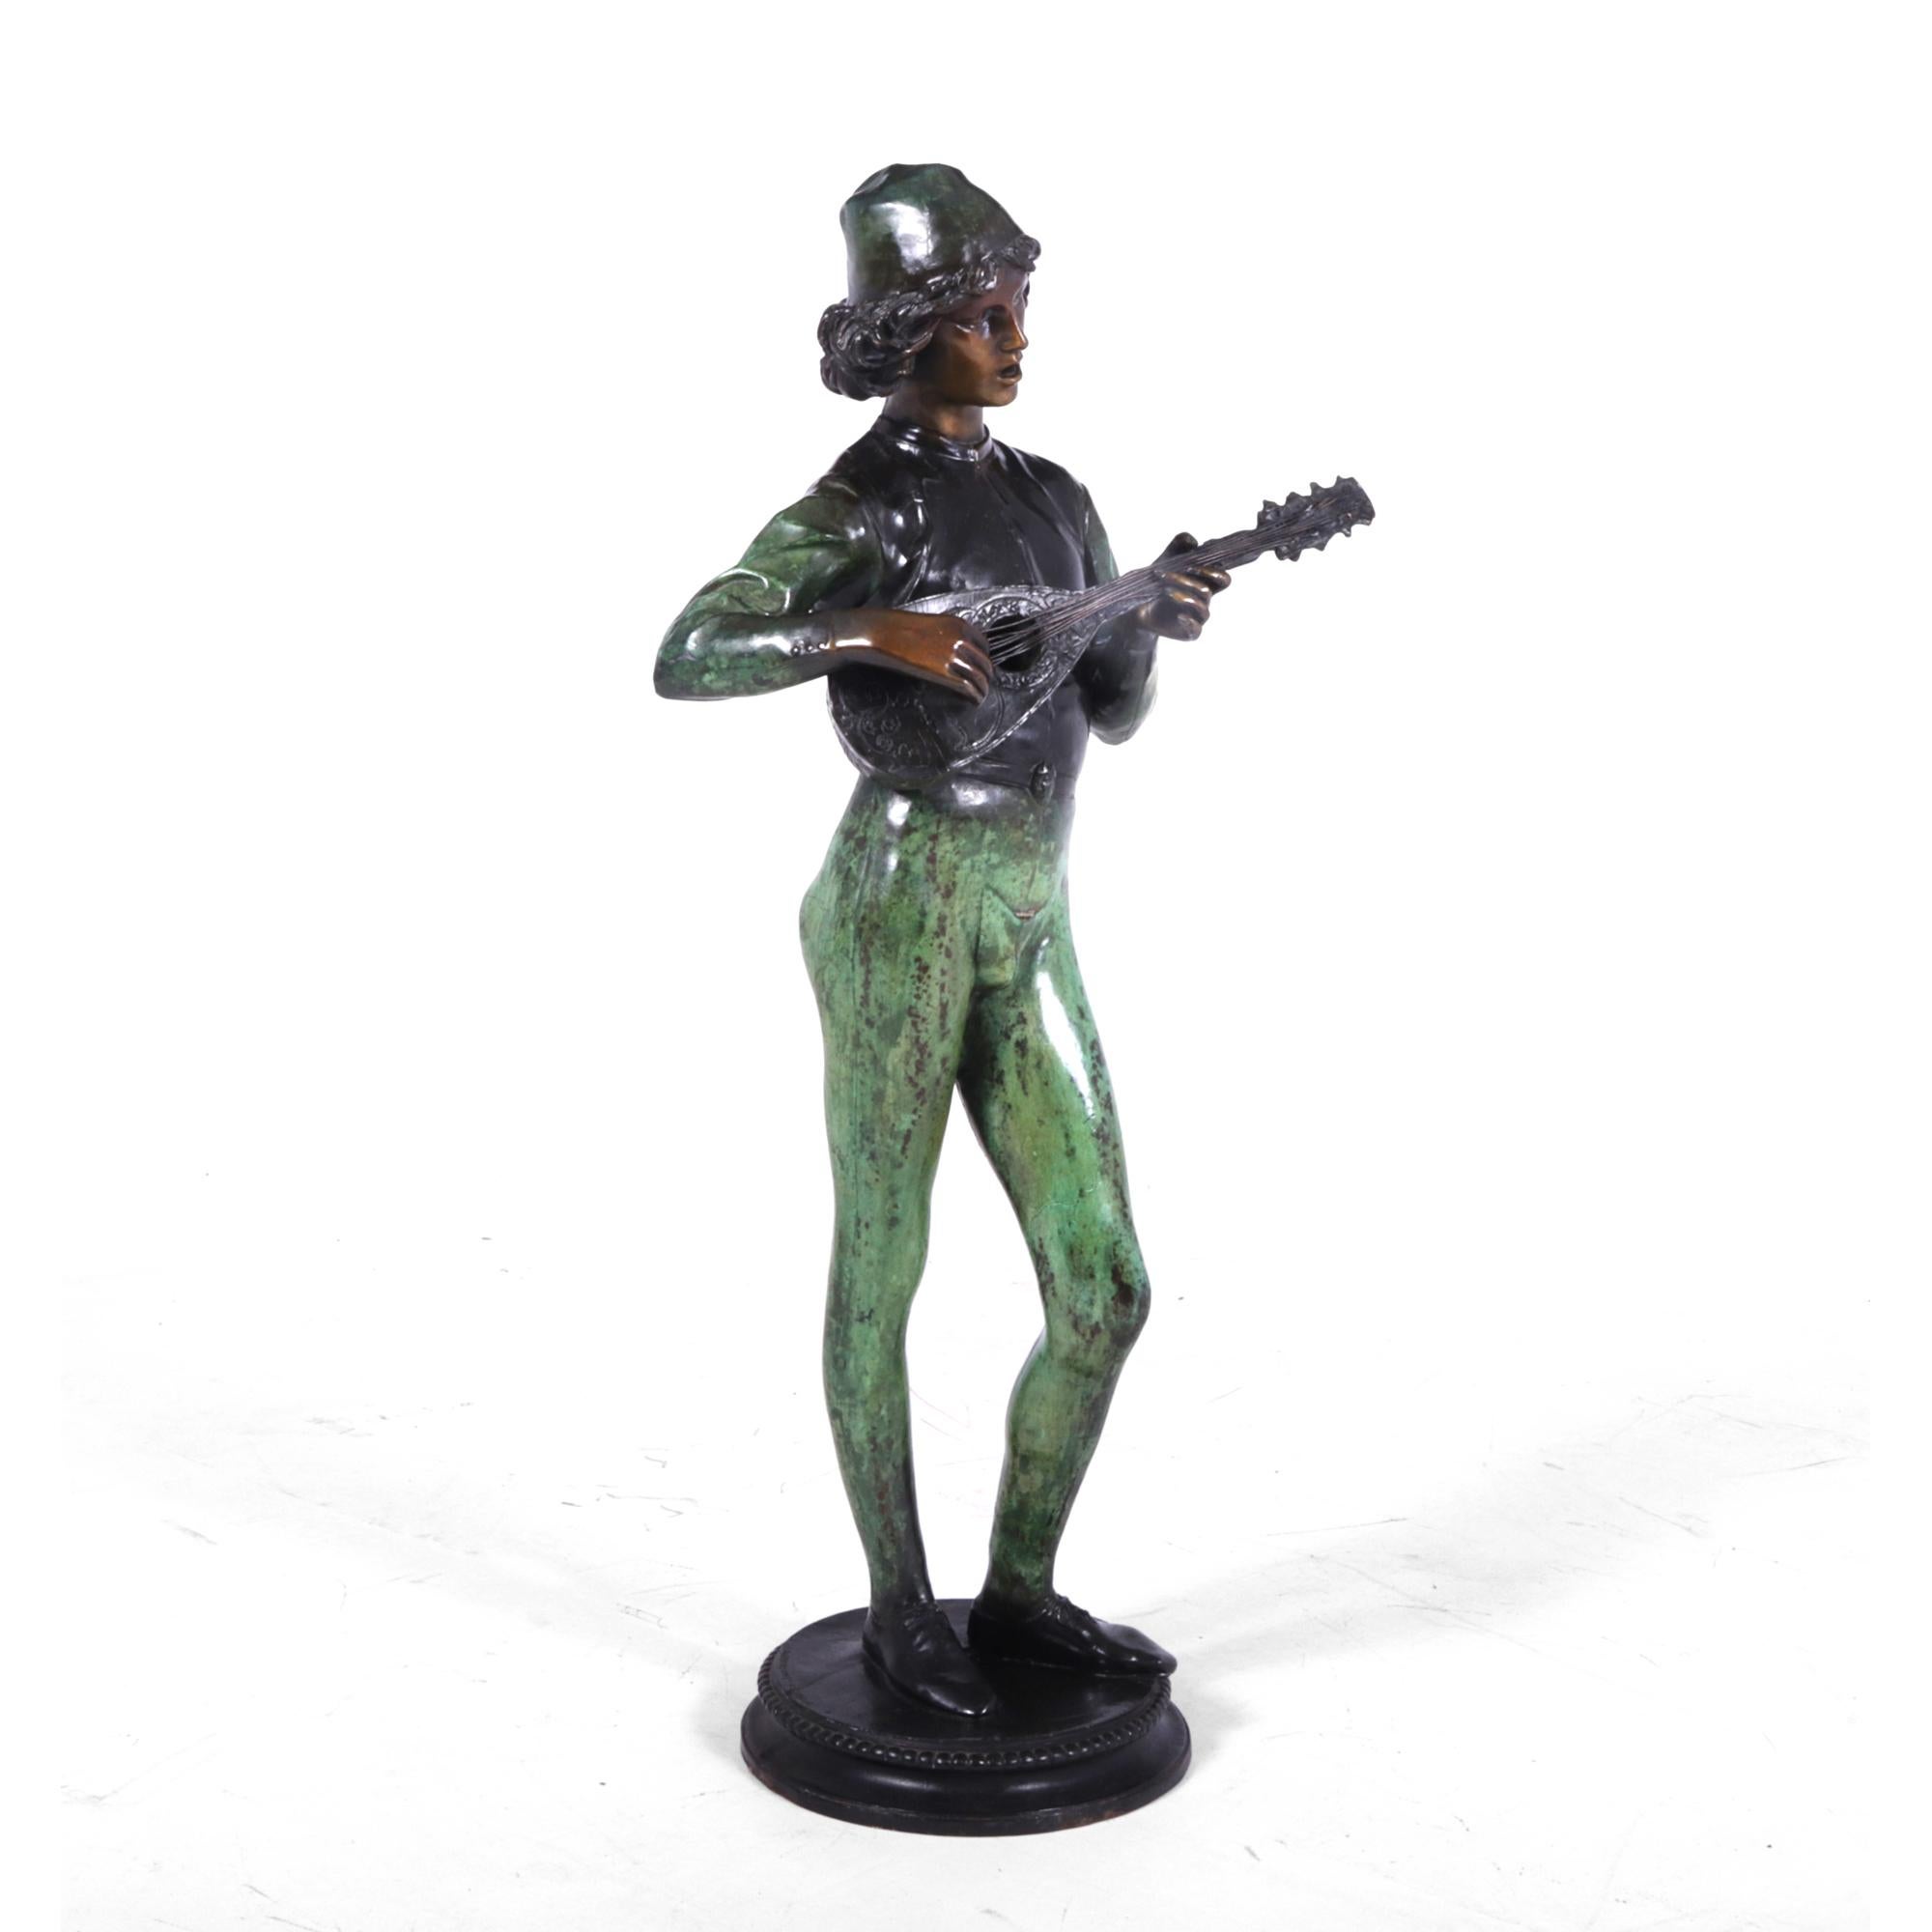 French Provincial Antique Bronze Sculpture ‘Standing Music Man’ by Barbedienne Fondeur c1880